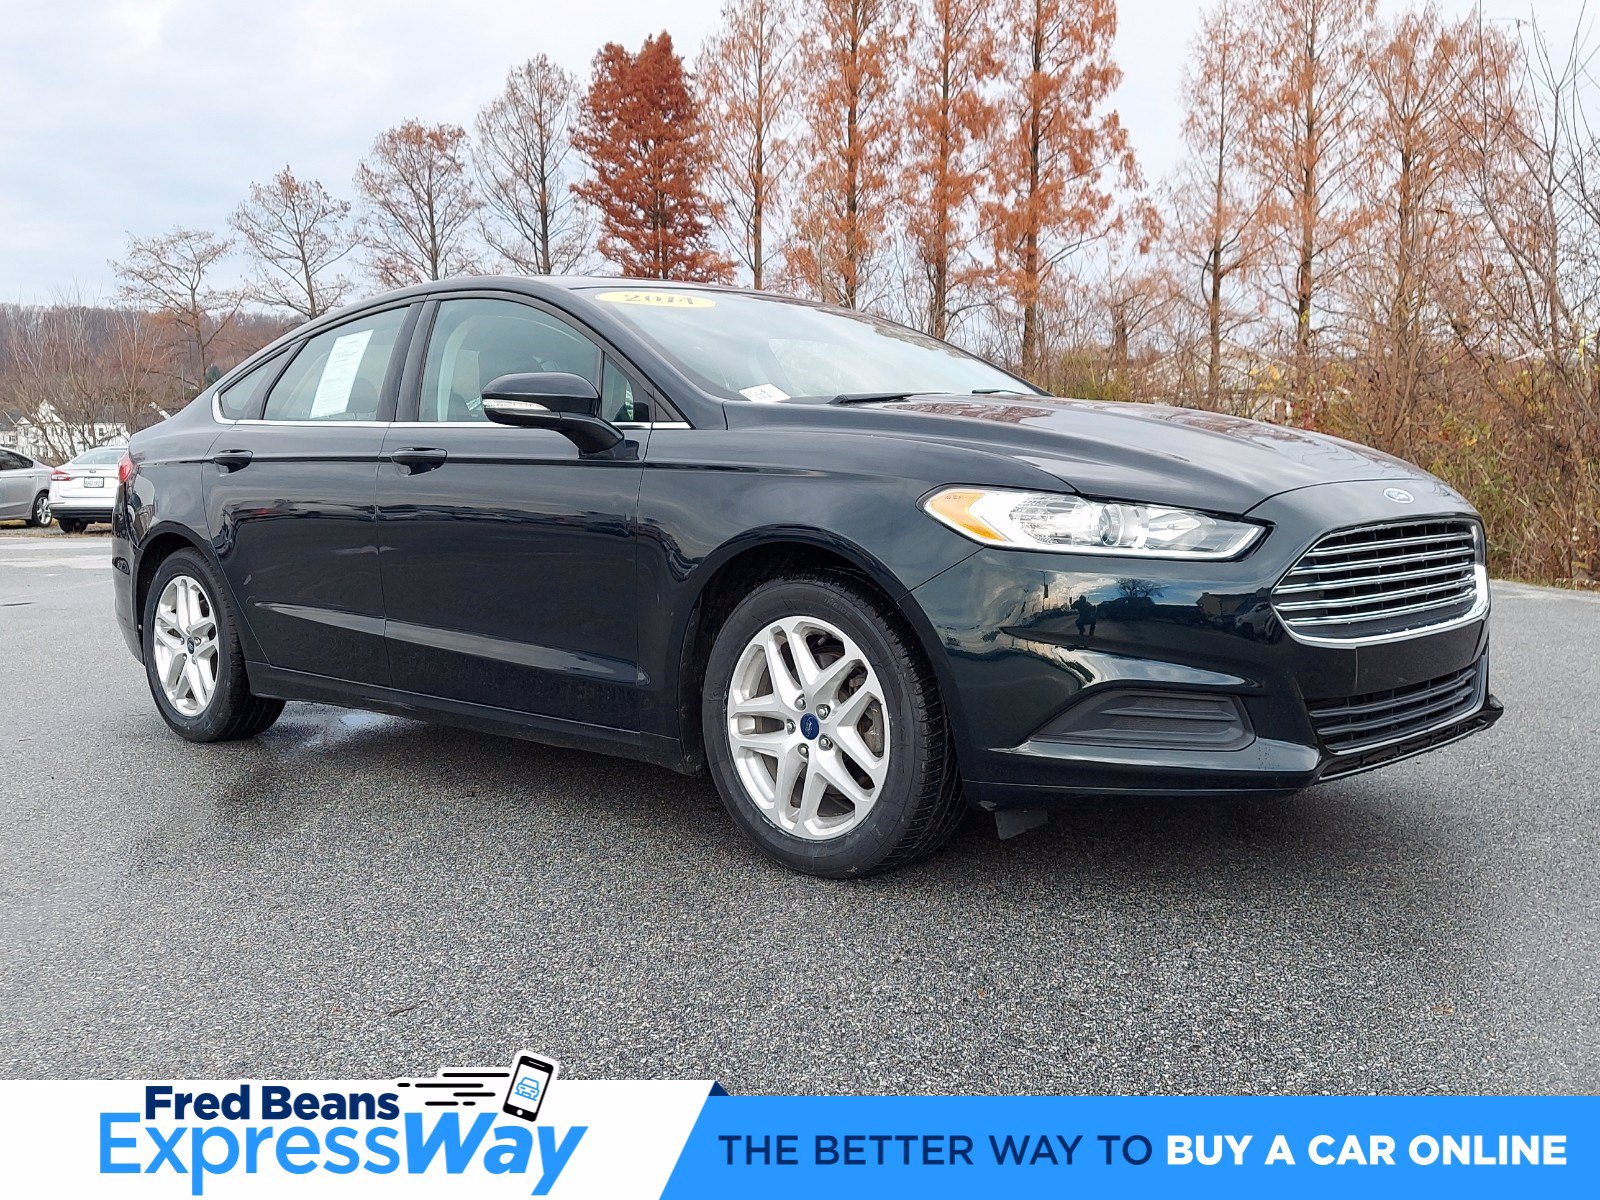 Used Ford Fusion Exton Pa